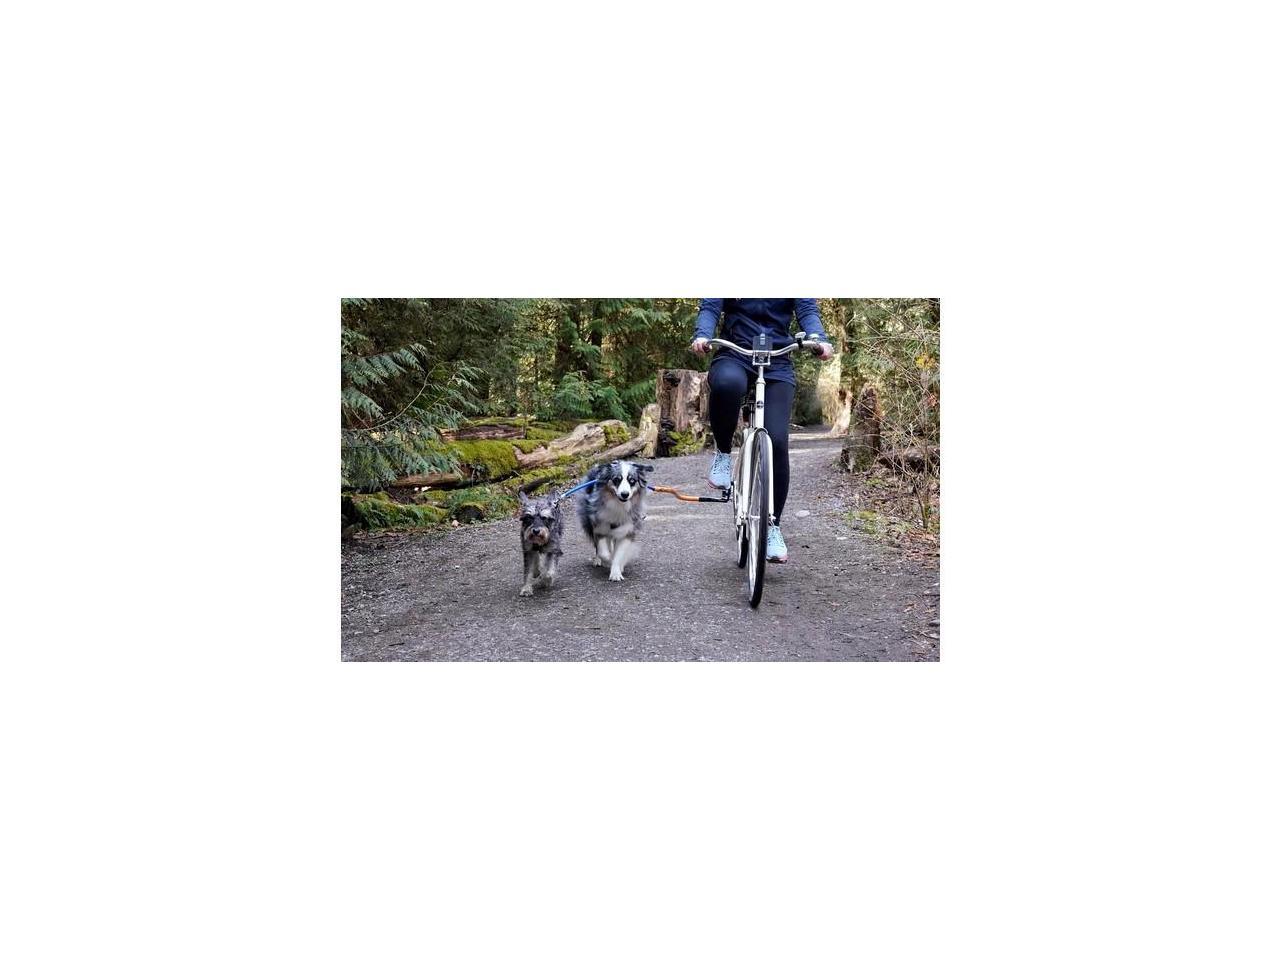 New Bike Tow Leash Dog Coupler 17.5 Inches Long 